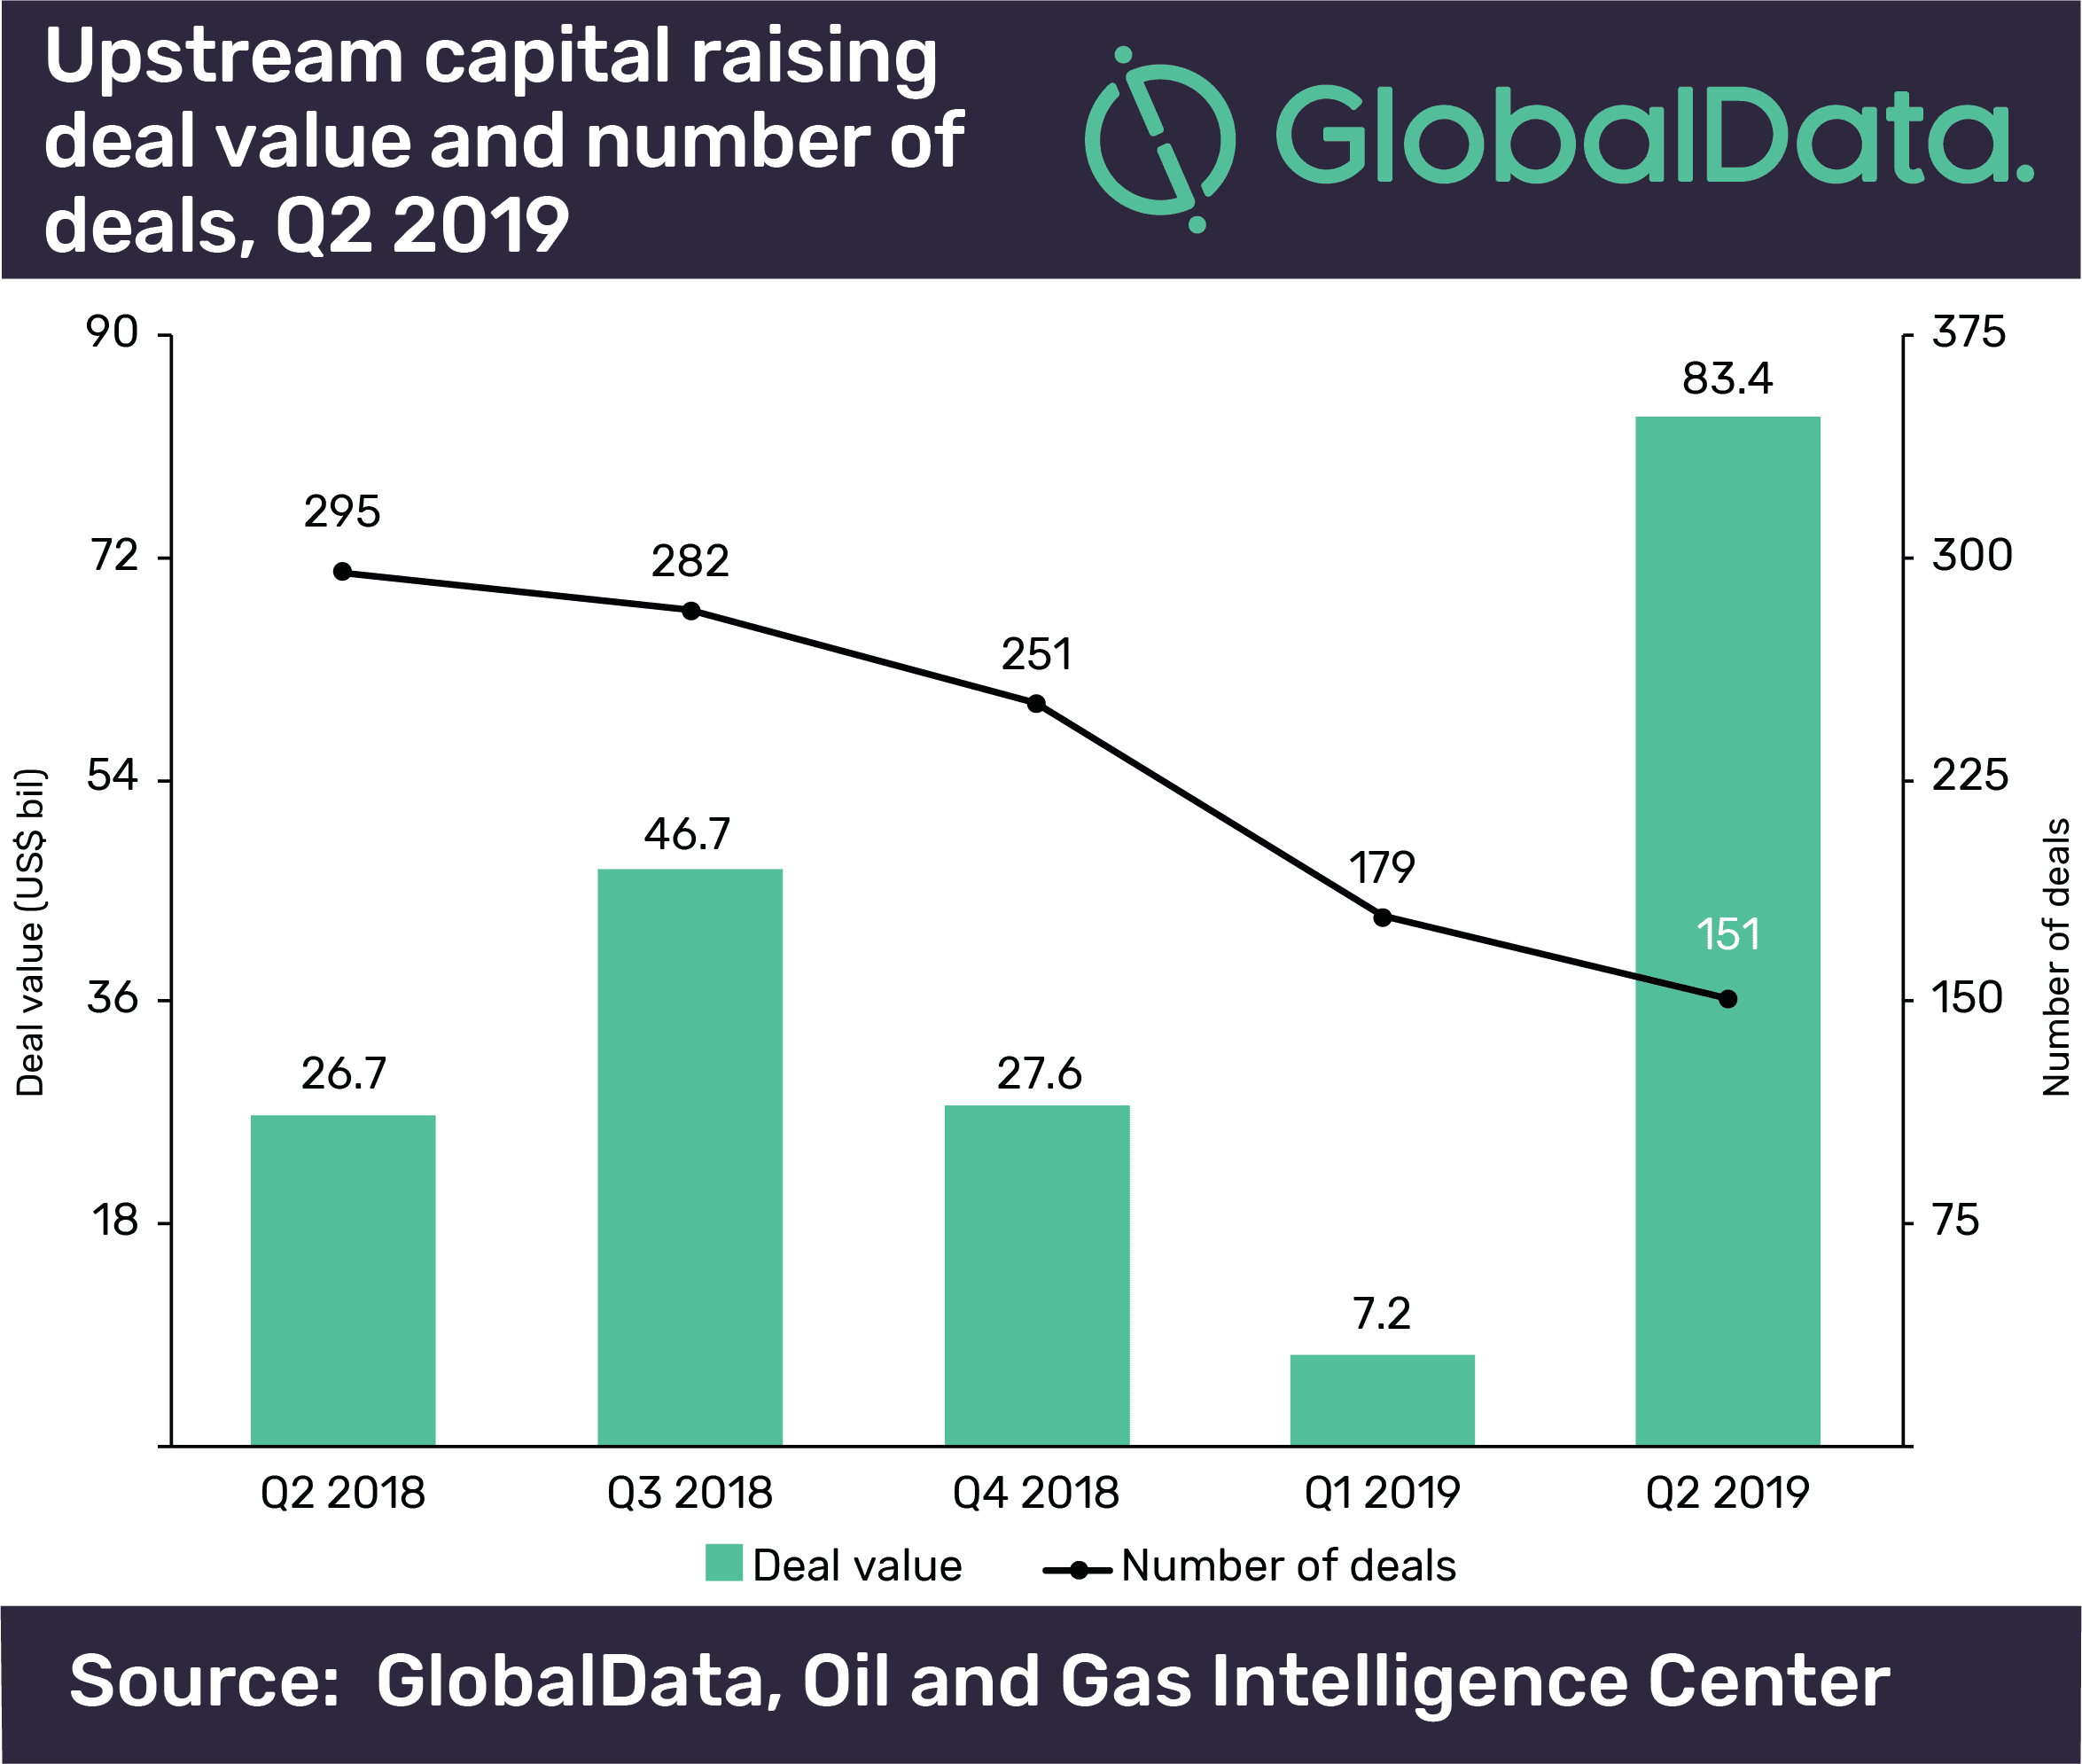 Upstream oil and gas M&A and capital raising deals totaled US$130.5bn in Q2 2019